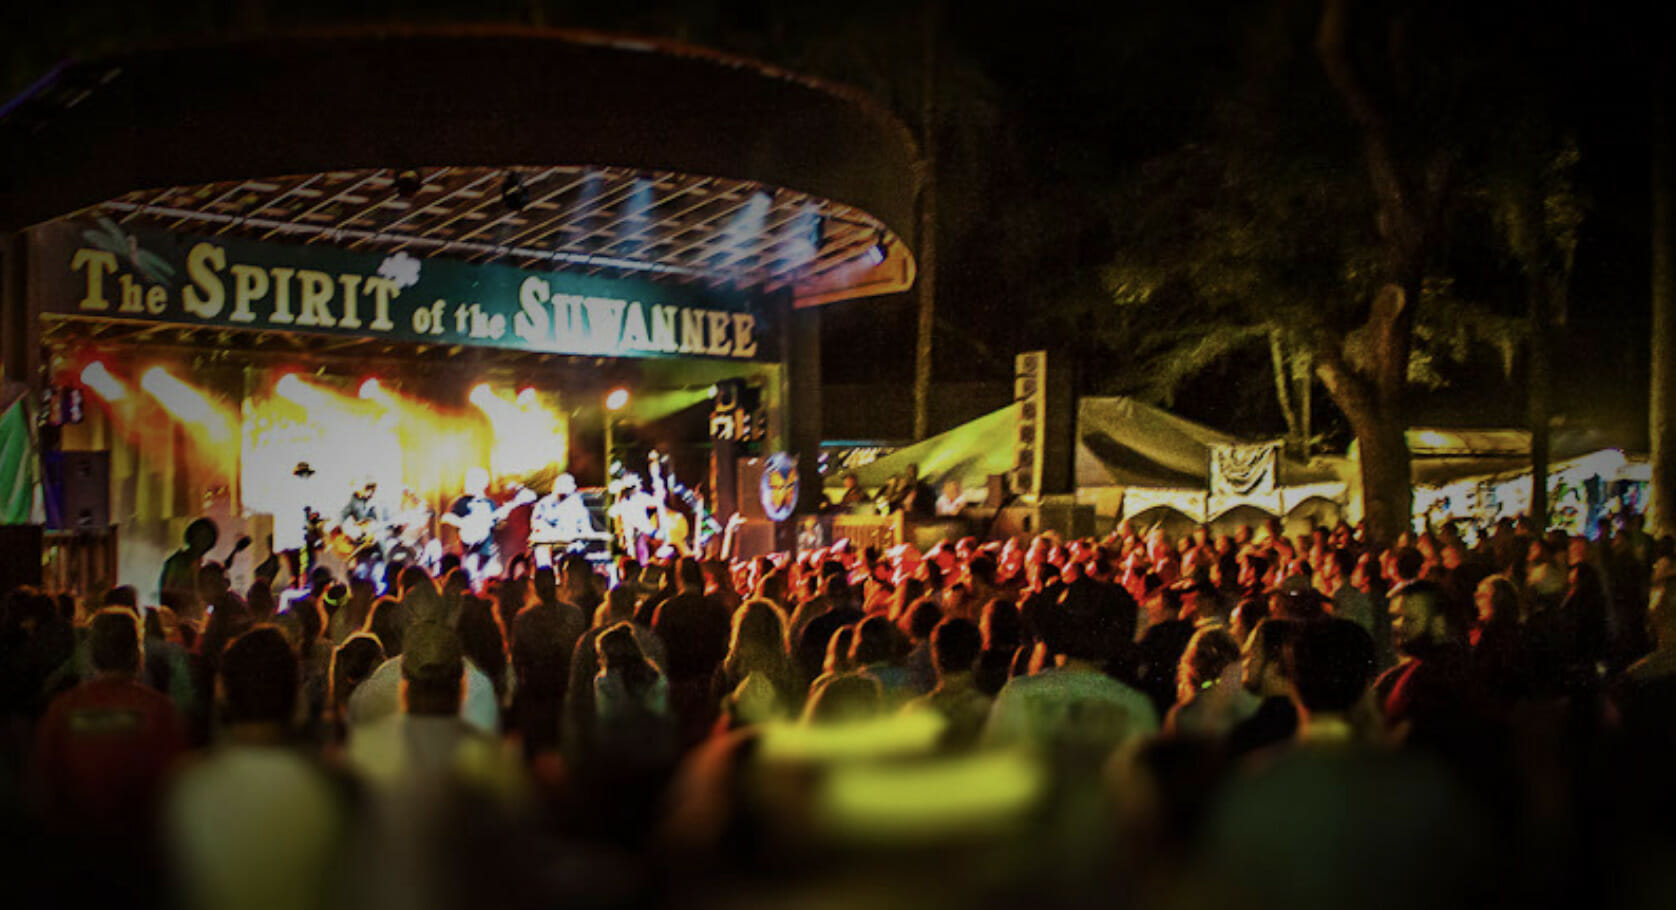 Suwannee Roots Revival Outlines Seventh Annual Lineup